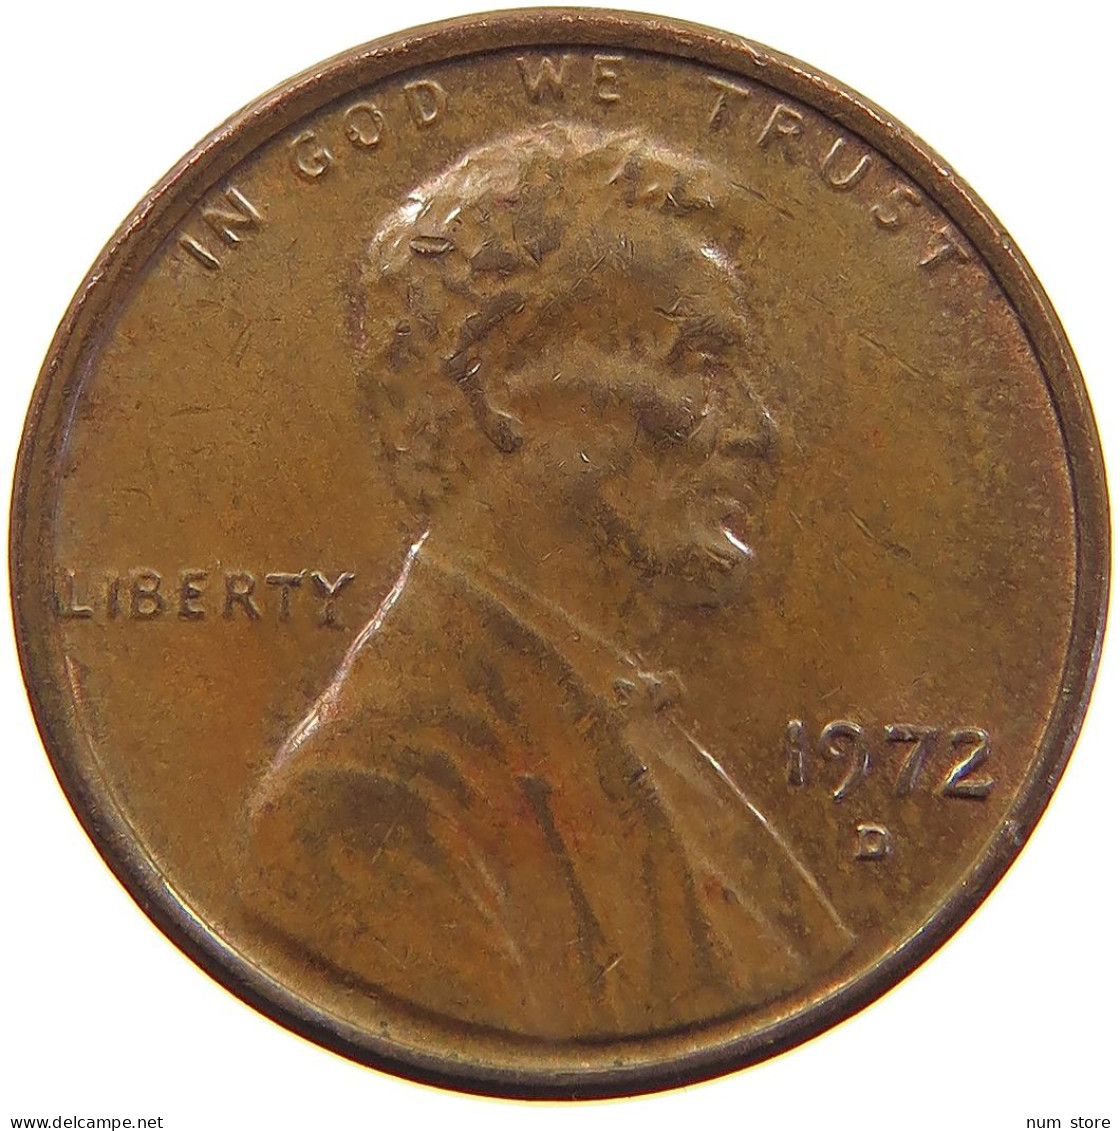 UNITED STATES OF AMERICA CENT 1972 D LINCOLN MEMORIAL #c079 0251 - 1959-…: Lincoln, Memorial Reverse